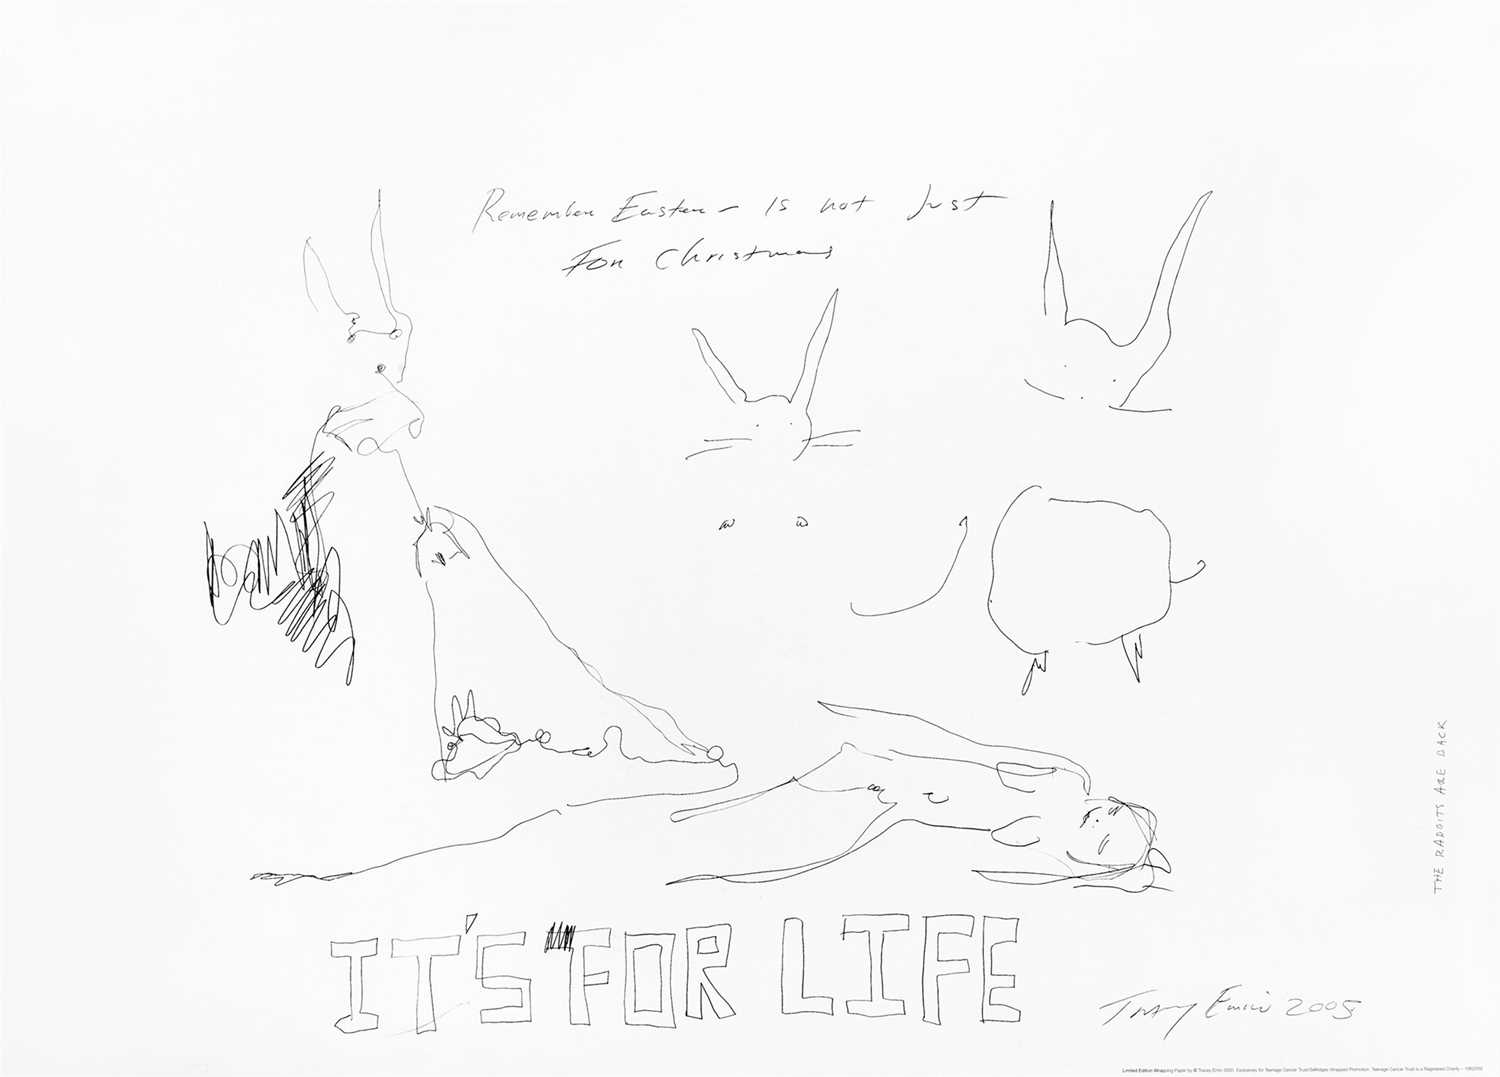 Lot 88 - Tracey Emin (British 1963-), 'Rabbits, It's For Life', 2005